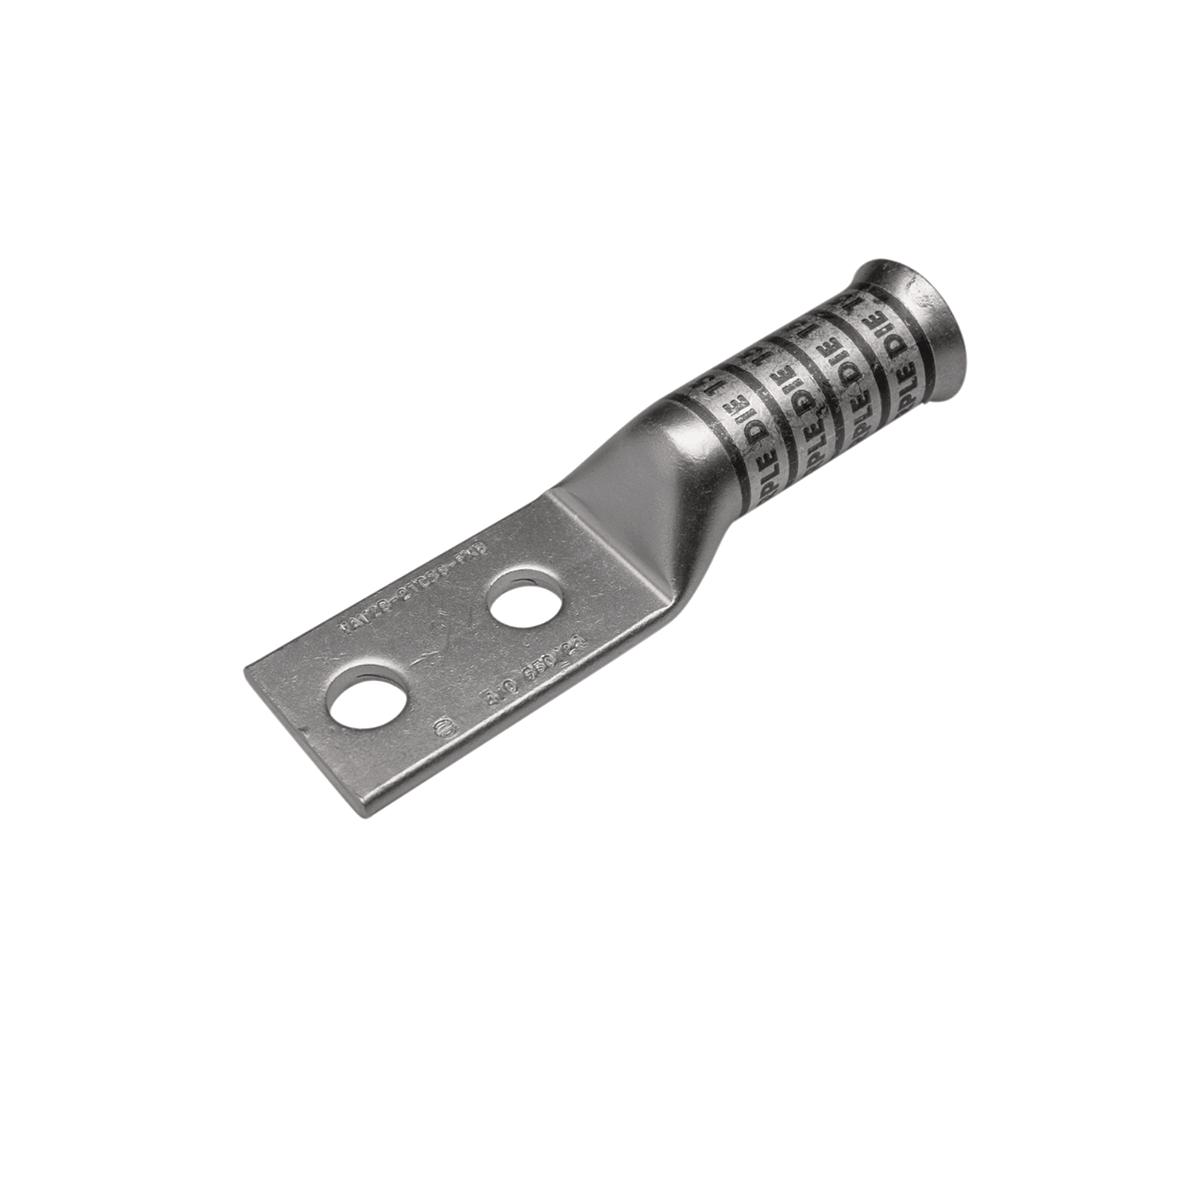 Hubbell YA382FXBG3 500 kcmil H,I,K / 550 kcmil G,H,I,535 DLO CU, Two Hole, 1/2 Stud Size, 1-3/16 Hole Spacing, Long Barrel, Bell End, Tin Plated, UL/CSA, 90°C, Up to 35kV, Pink Color Code, L99 Die Index. 